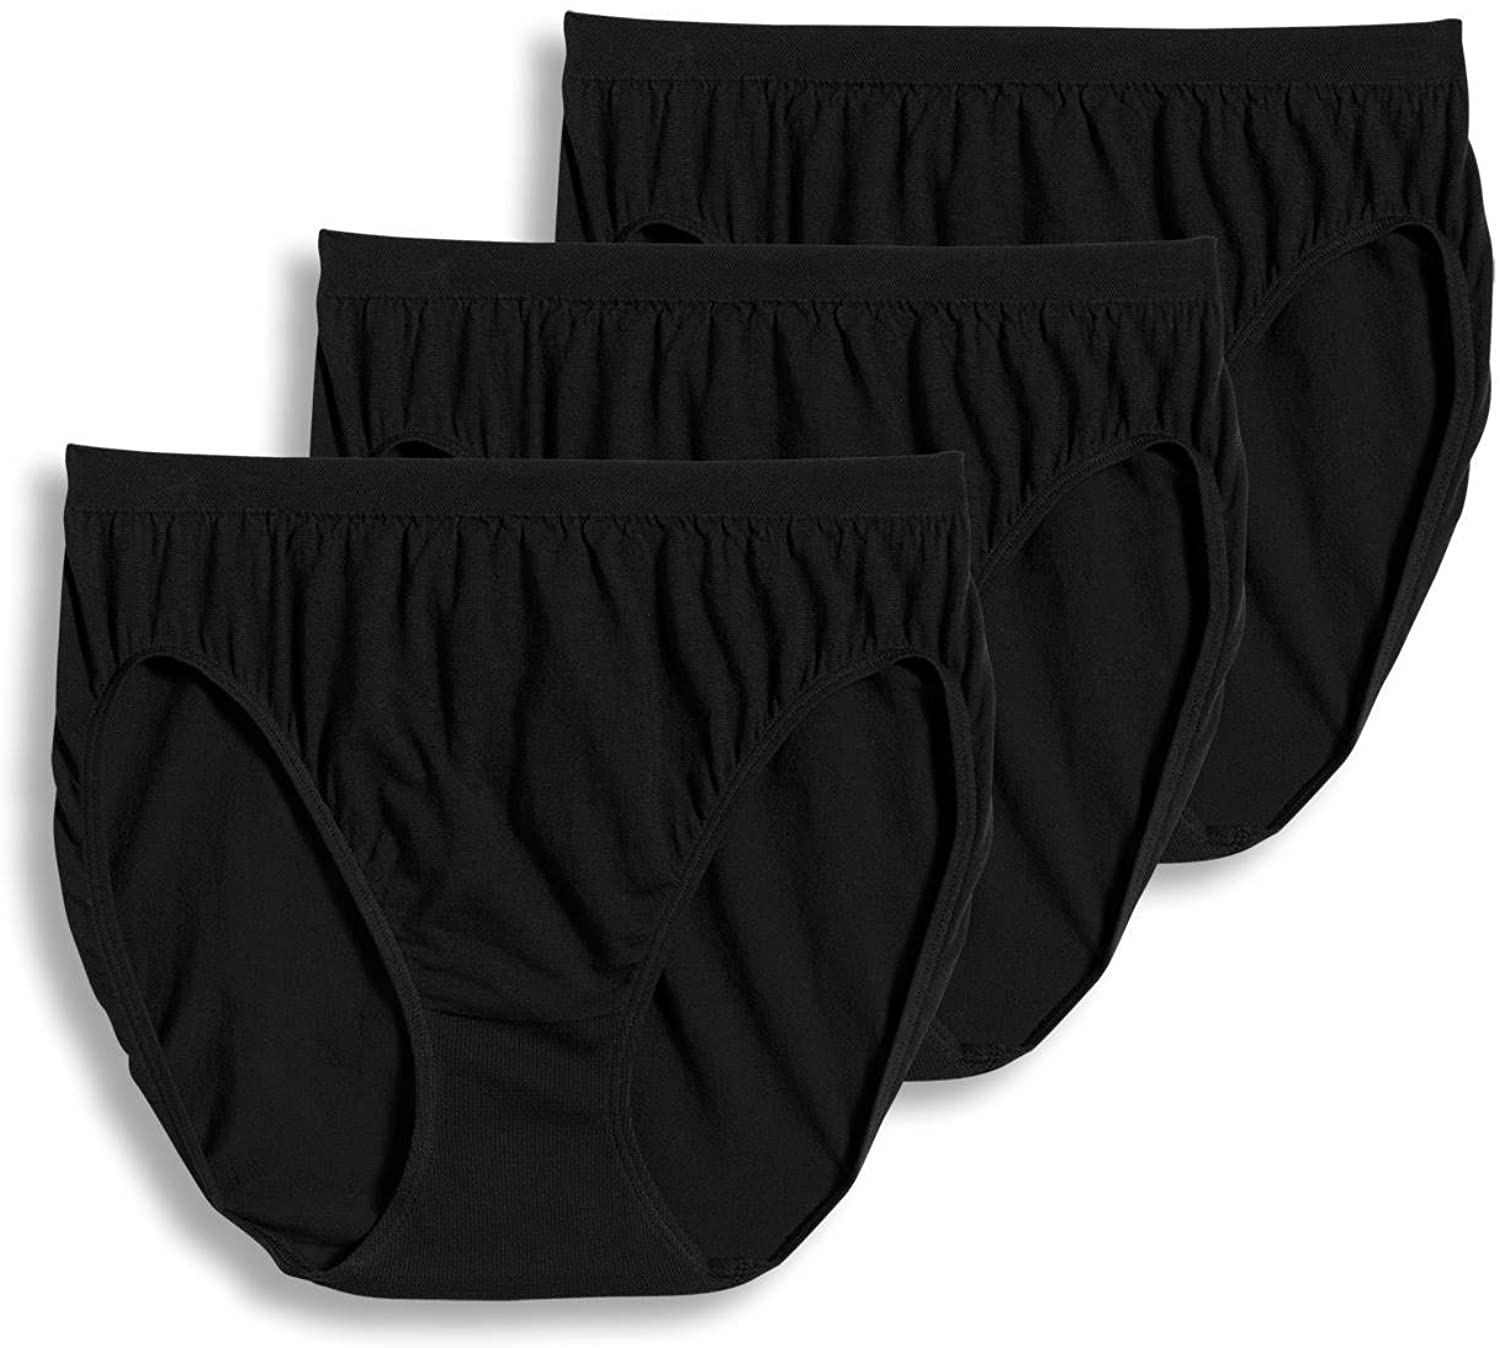 Price:$27.00 Jockey Women's Underwear Comfies Cotton French Cut - 3 Pack at Amazon Women’s Clothing store